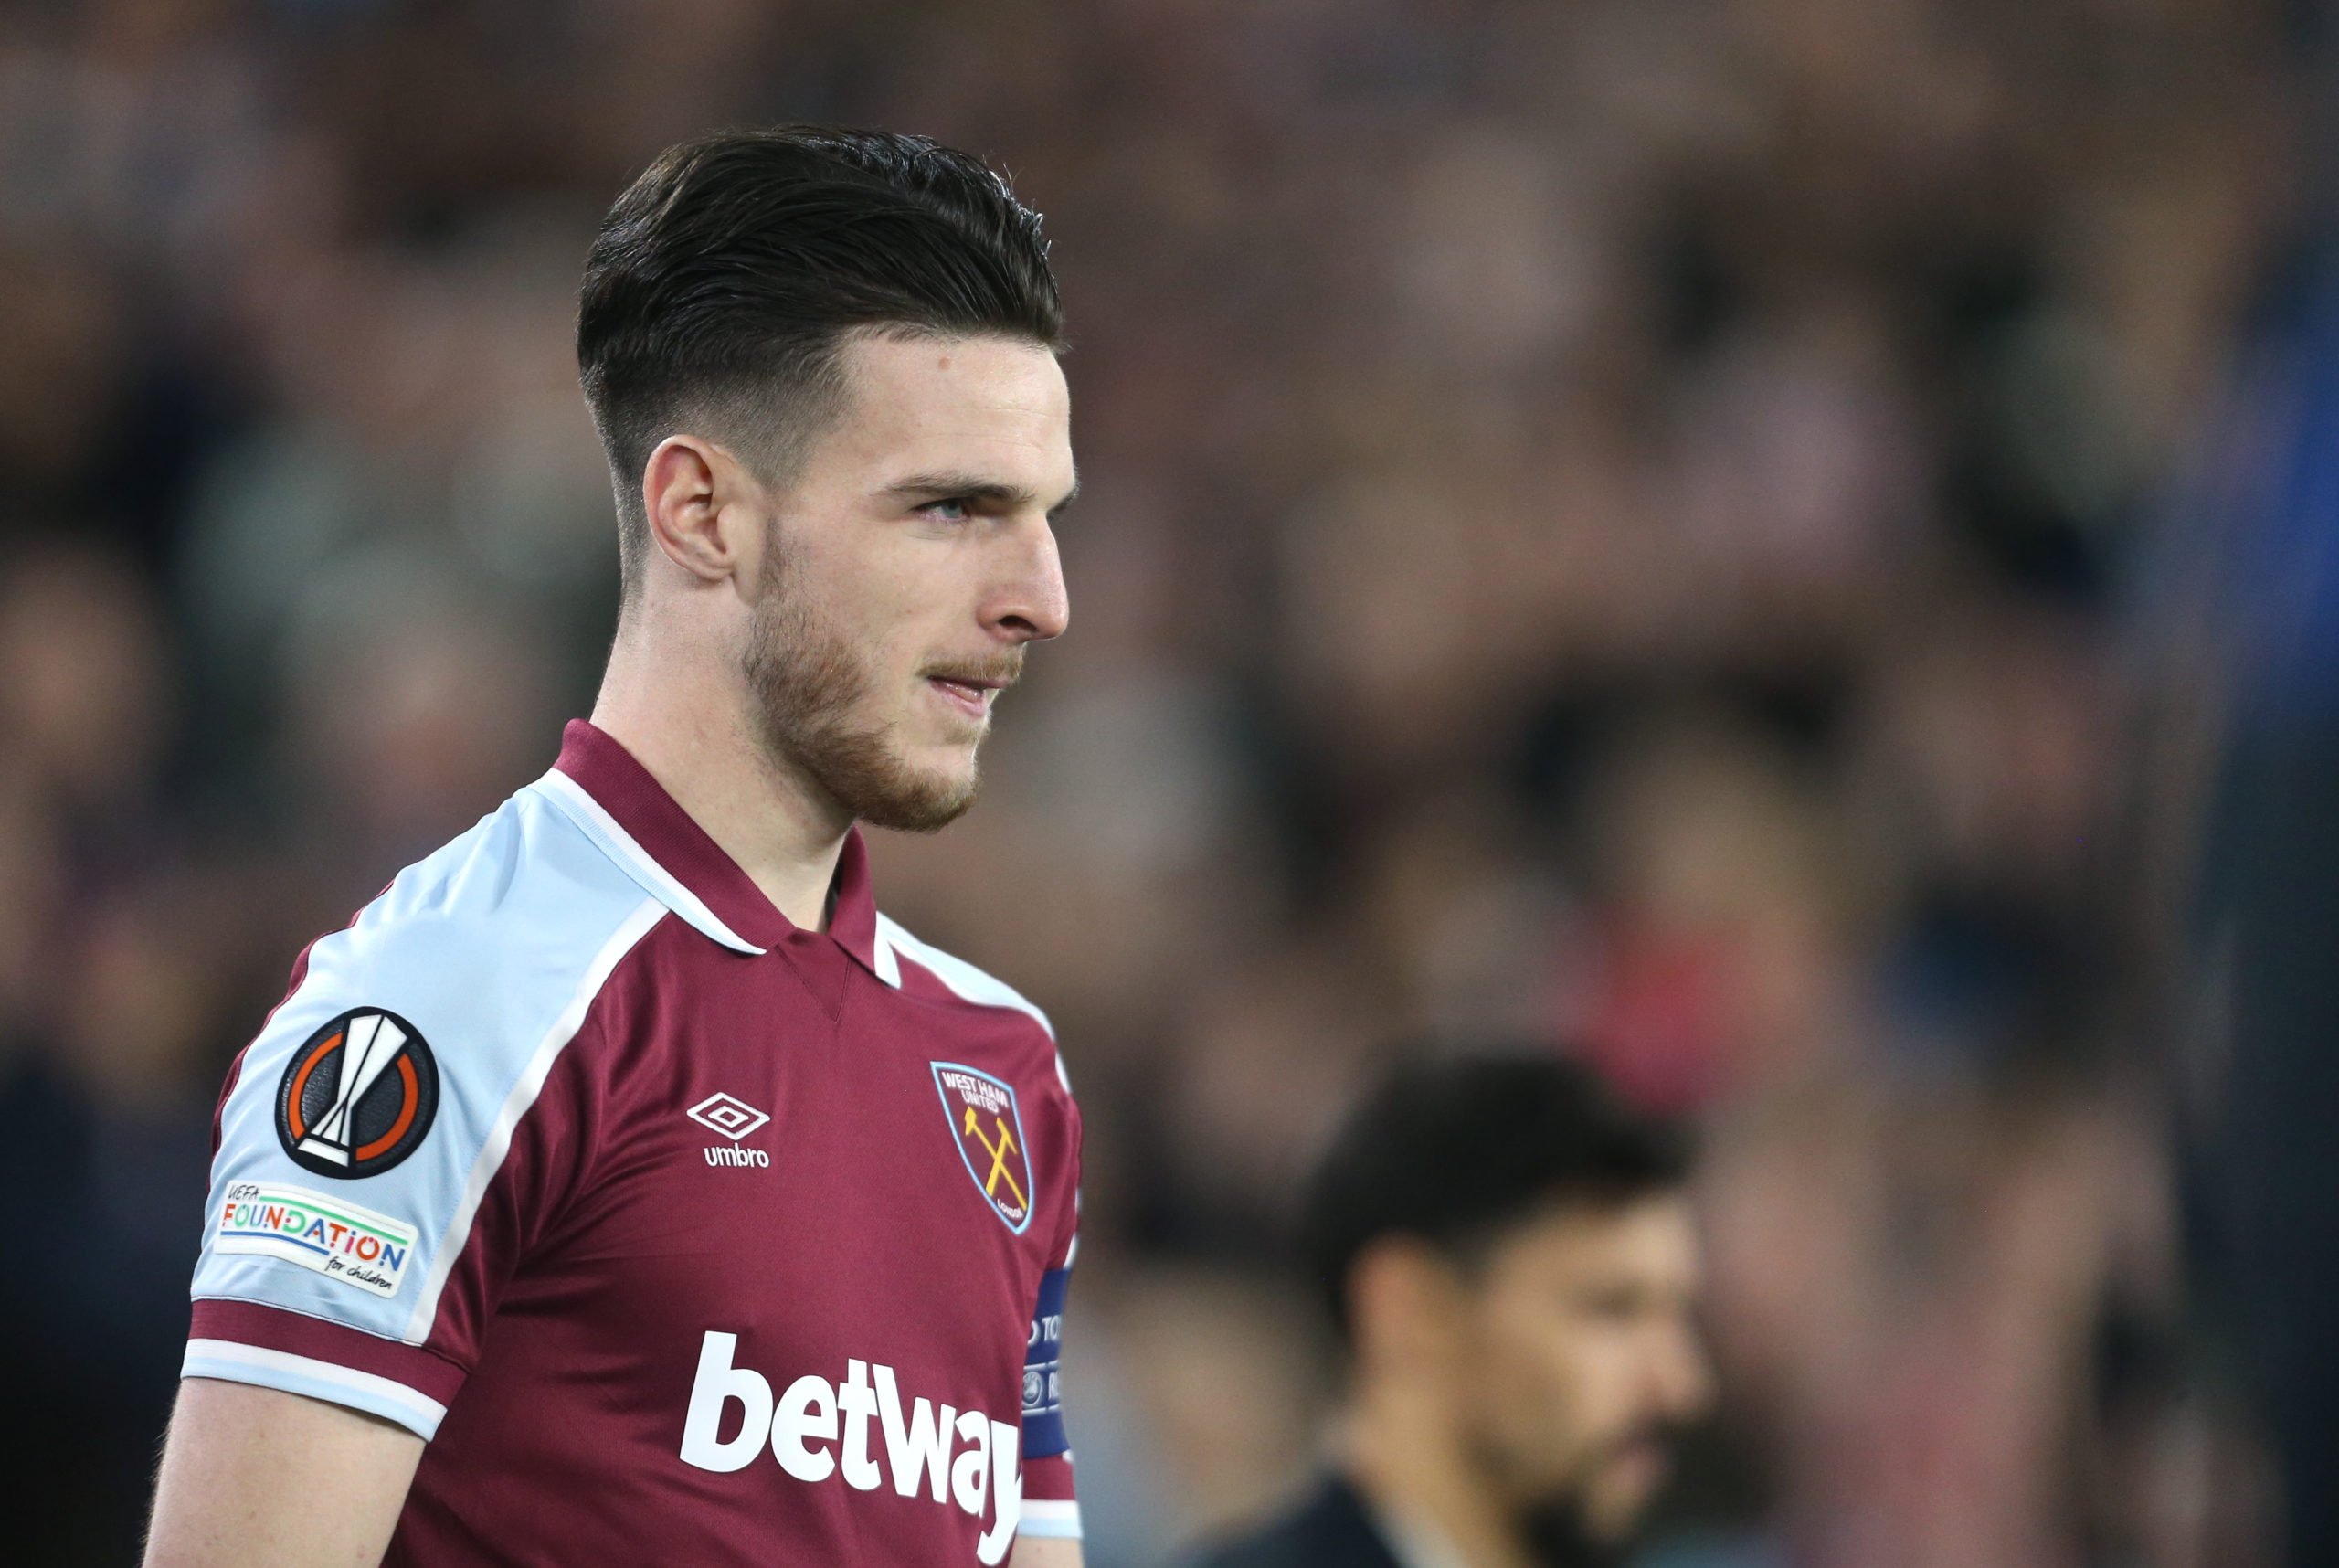 Declan Rice posts two-word message with West Ham bag from England camp after sitting out training